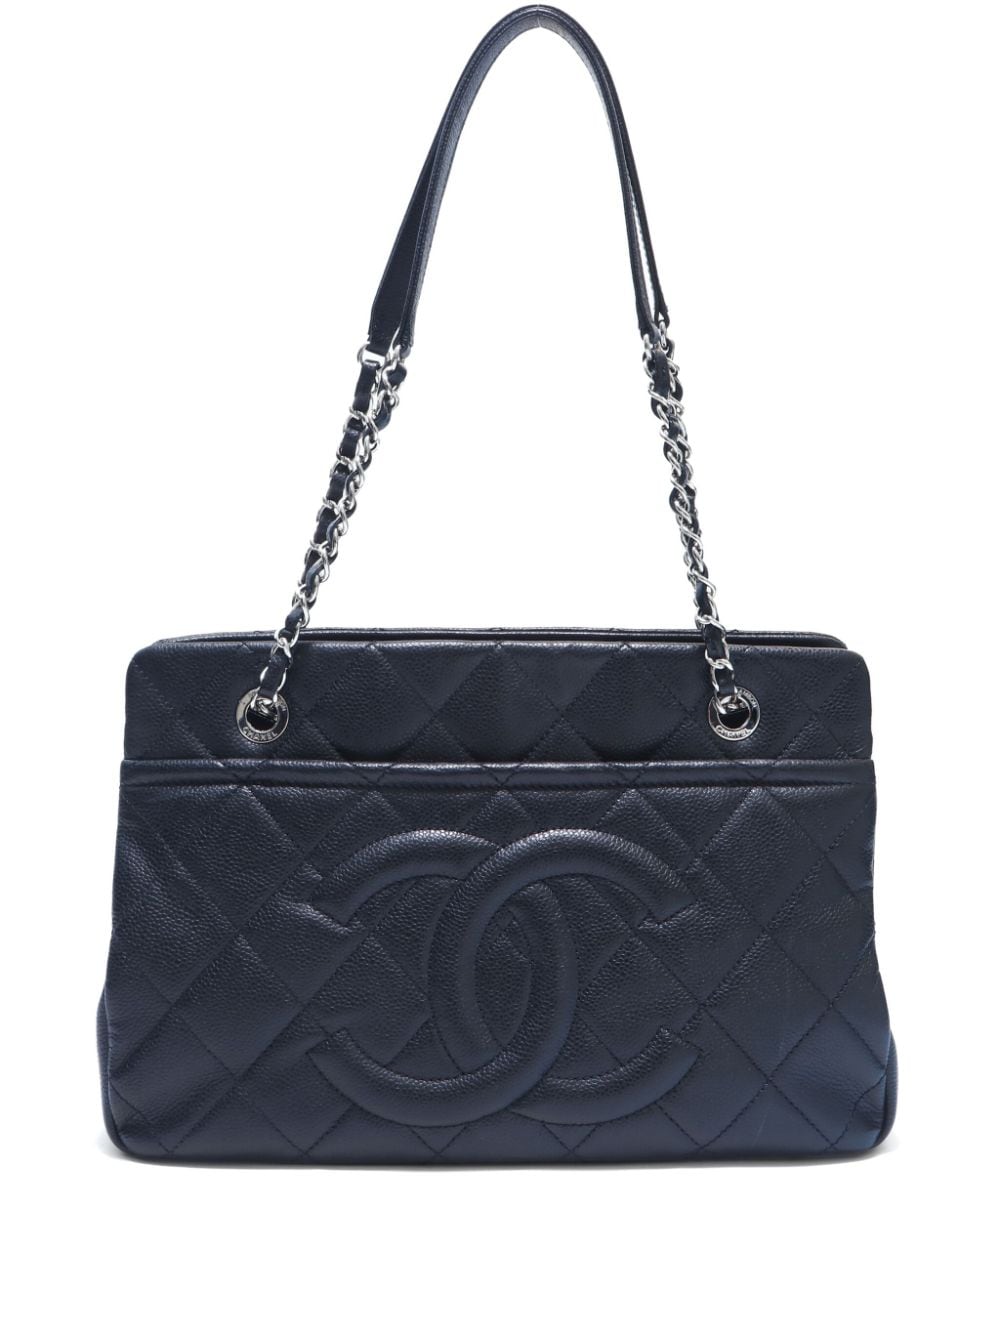 Pre-owned Chanel 2013 Grand Shopping Tote Bag In Black